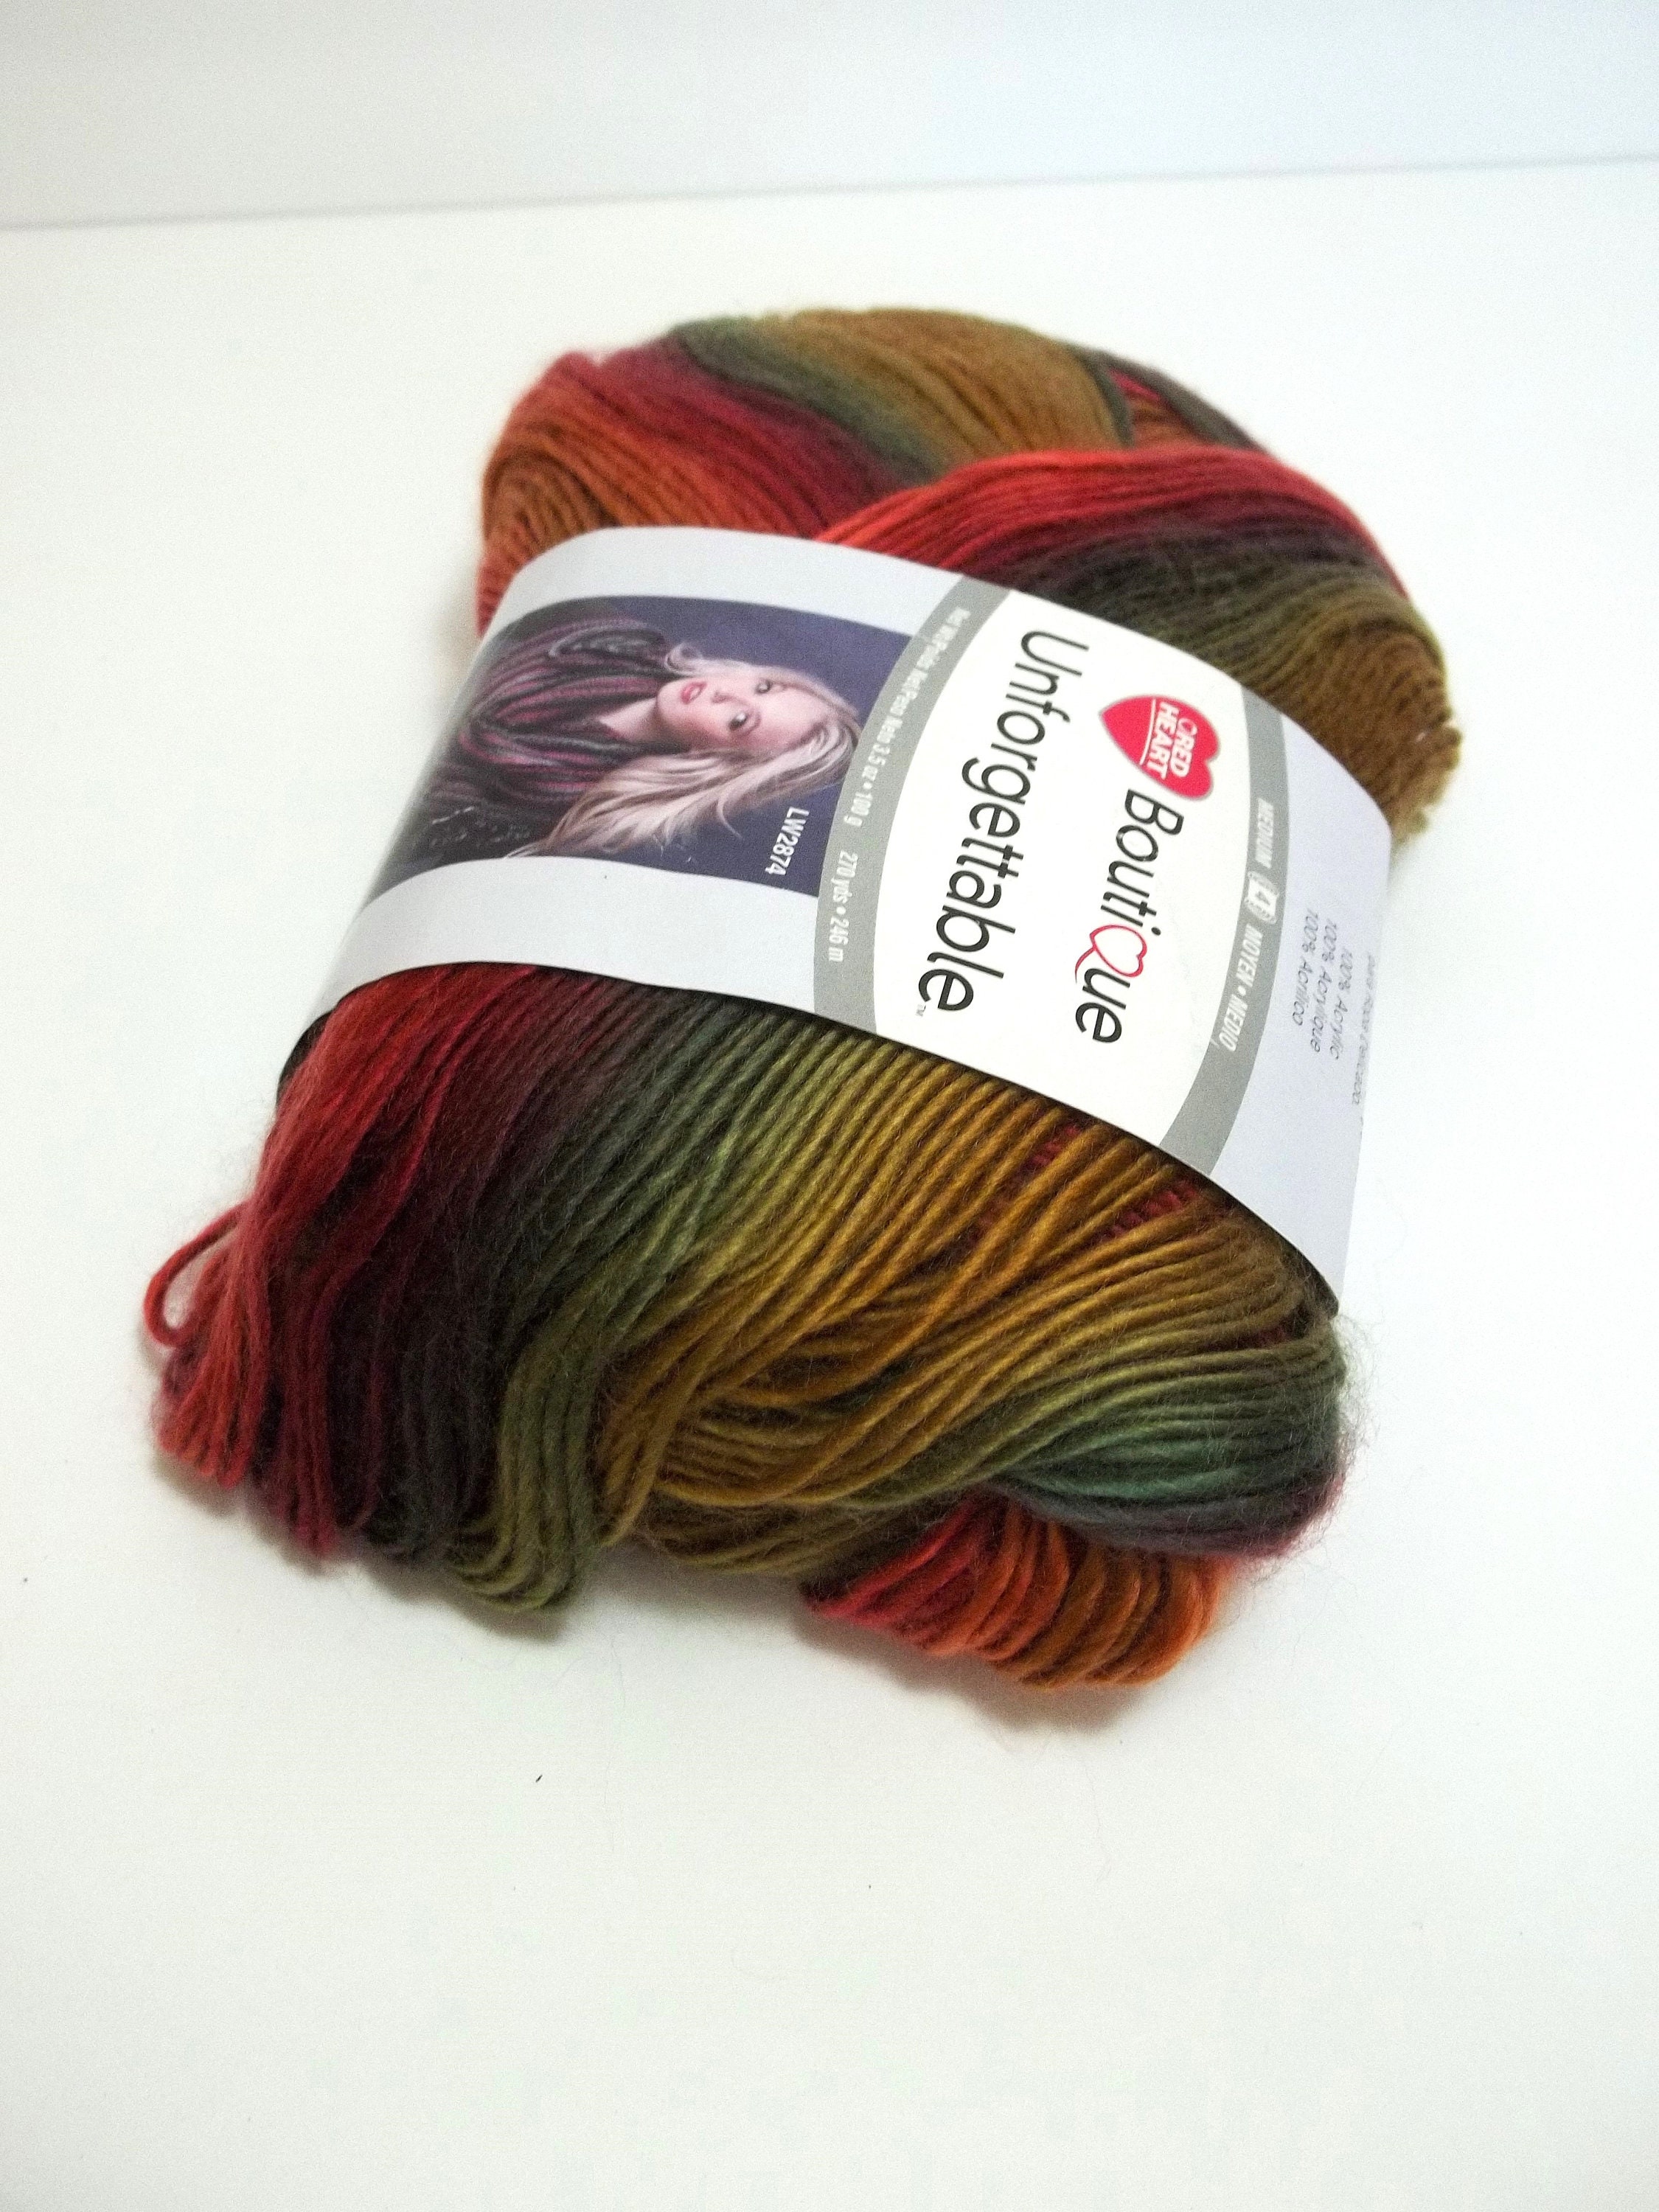 COATS & CLARK Red Heart Boutique Unforgettable Yarn-Polo